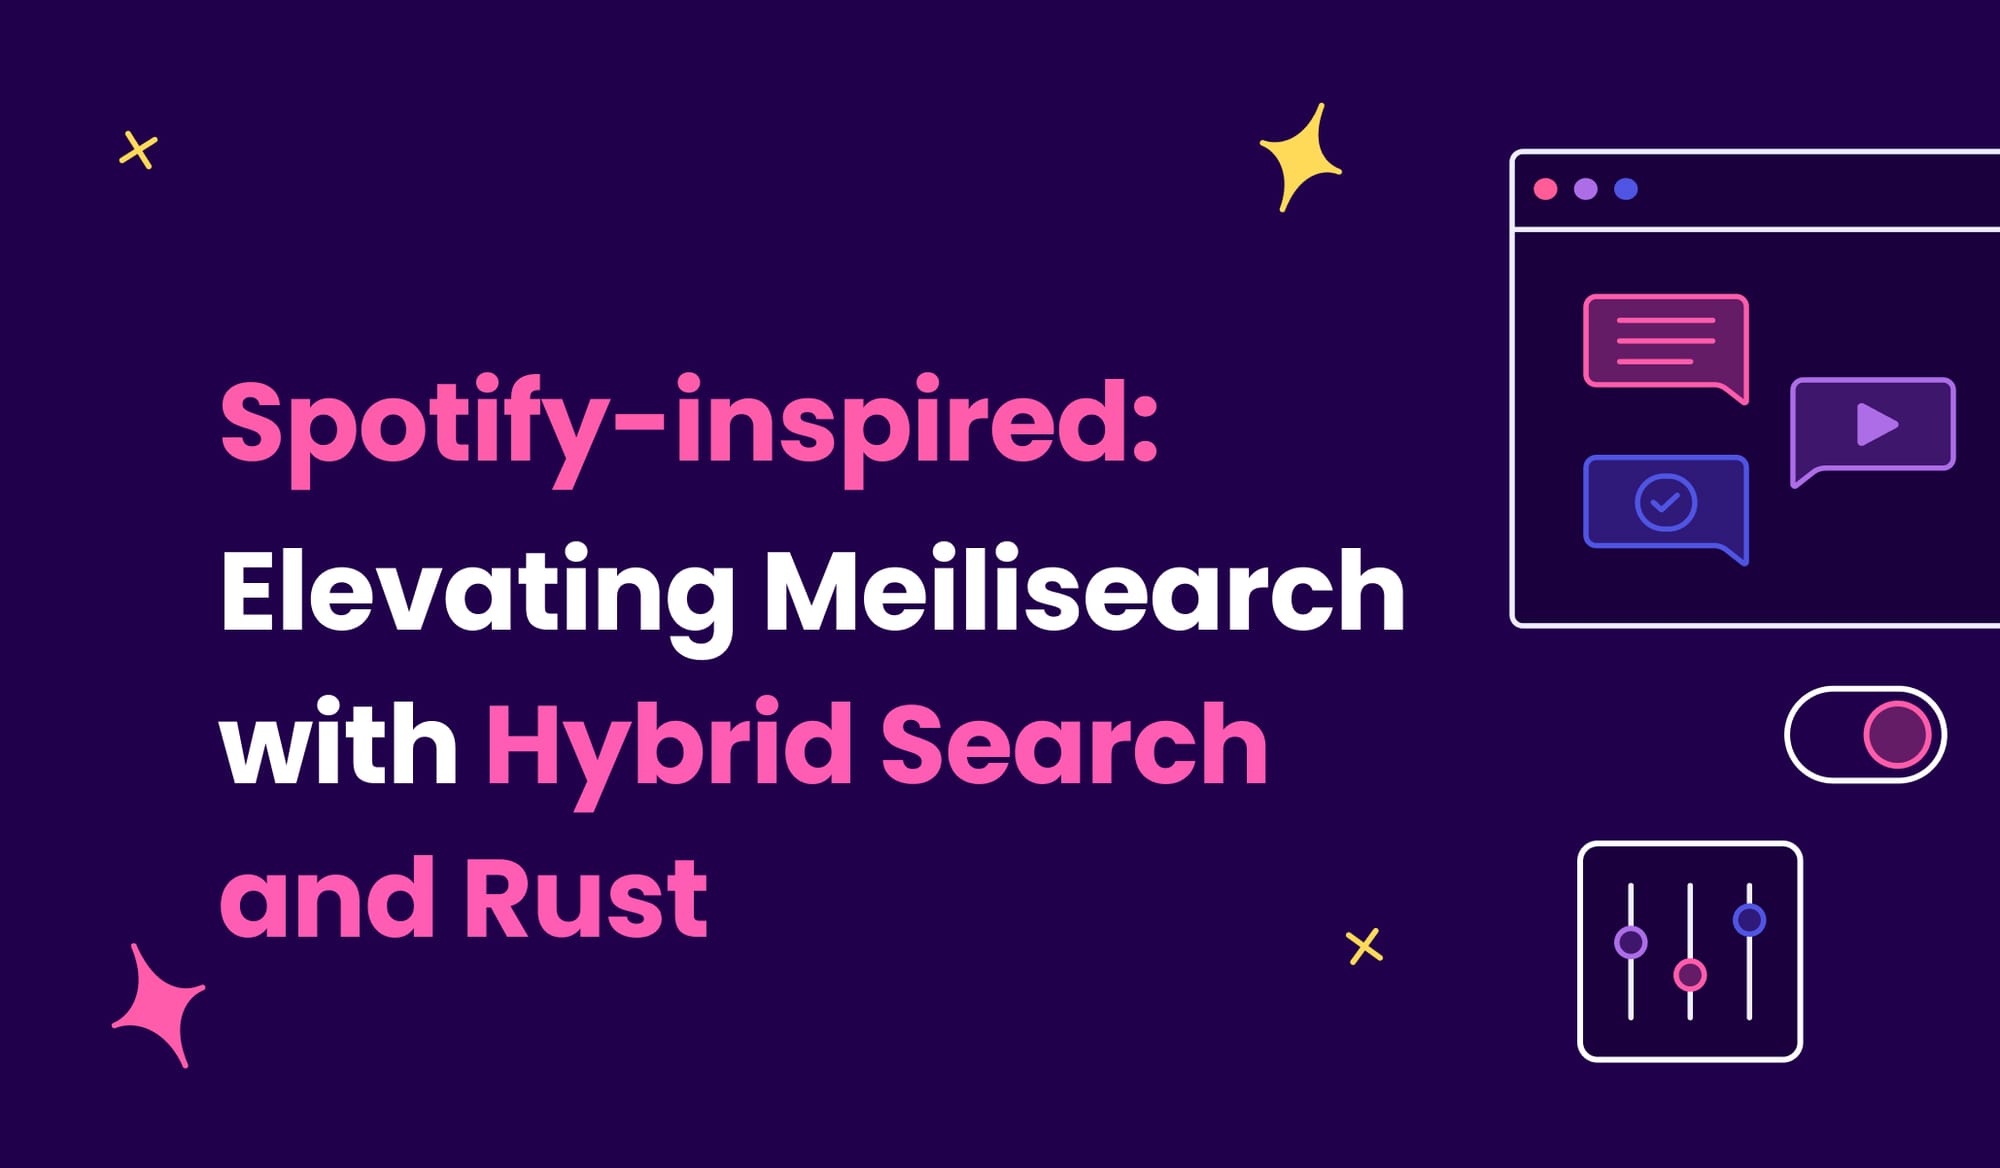 Spotify-Inspired: Elevating Meilisearch with Hybrid Search and Rust